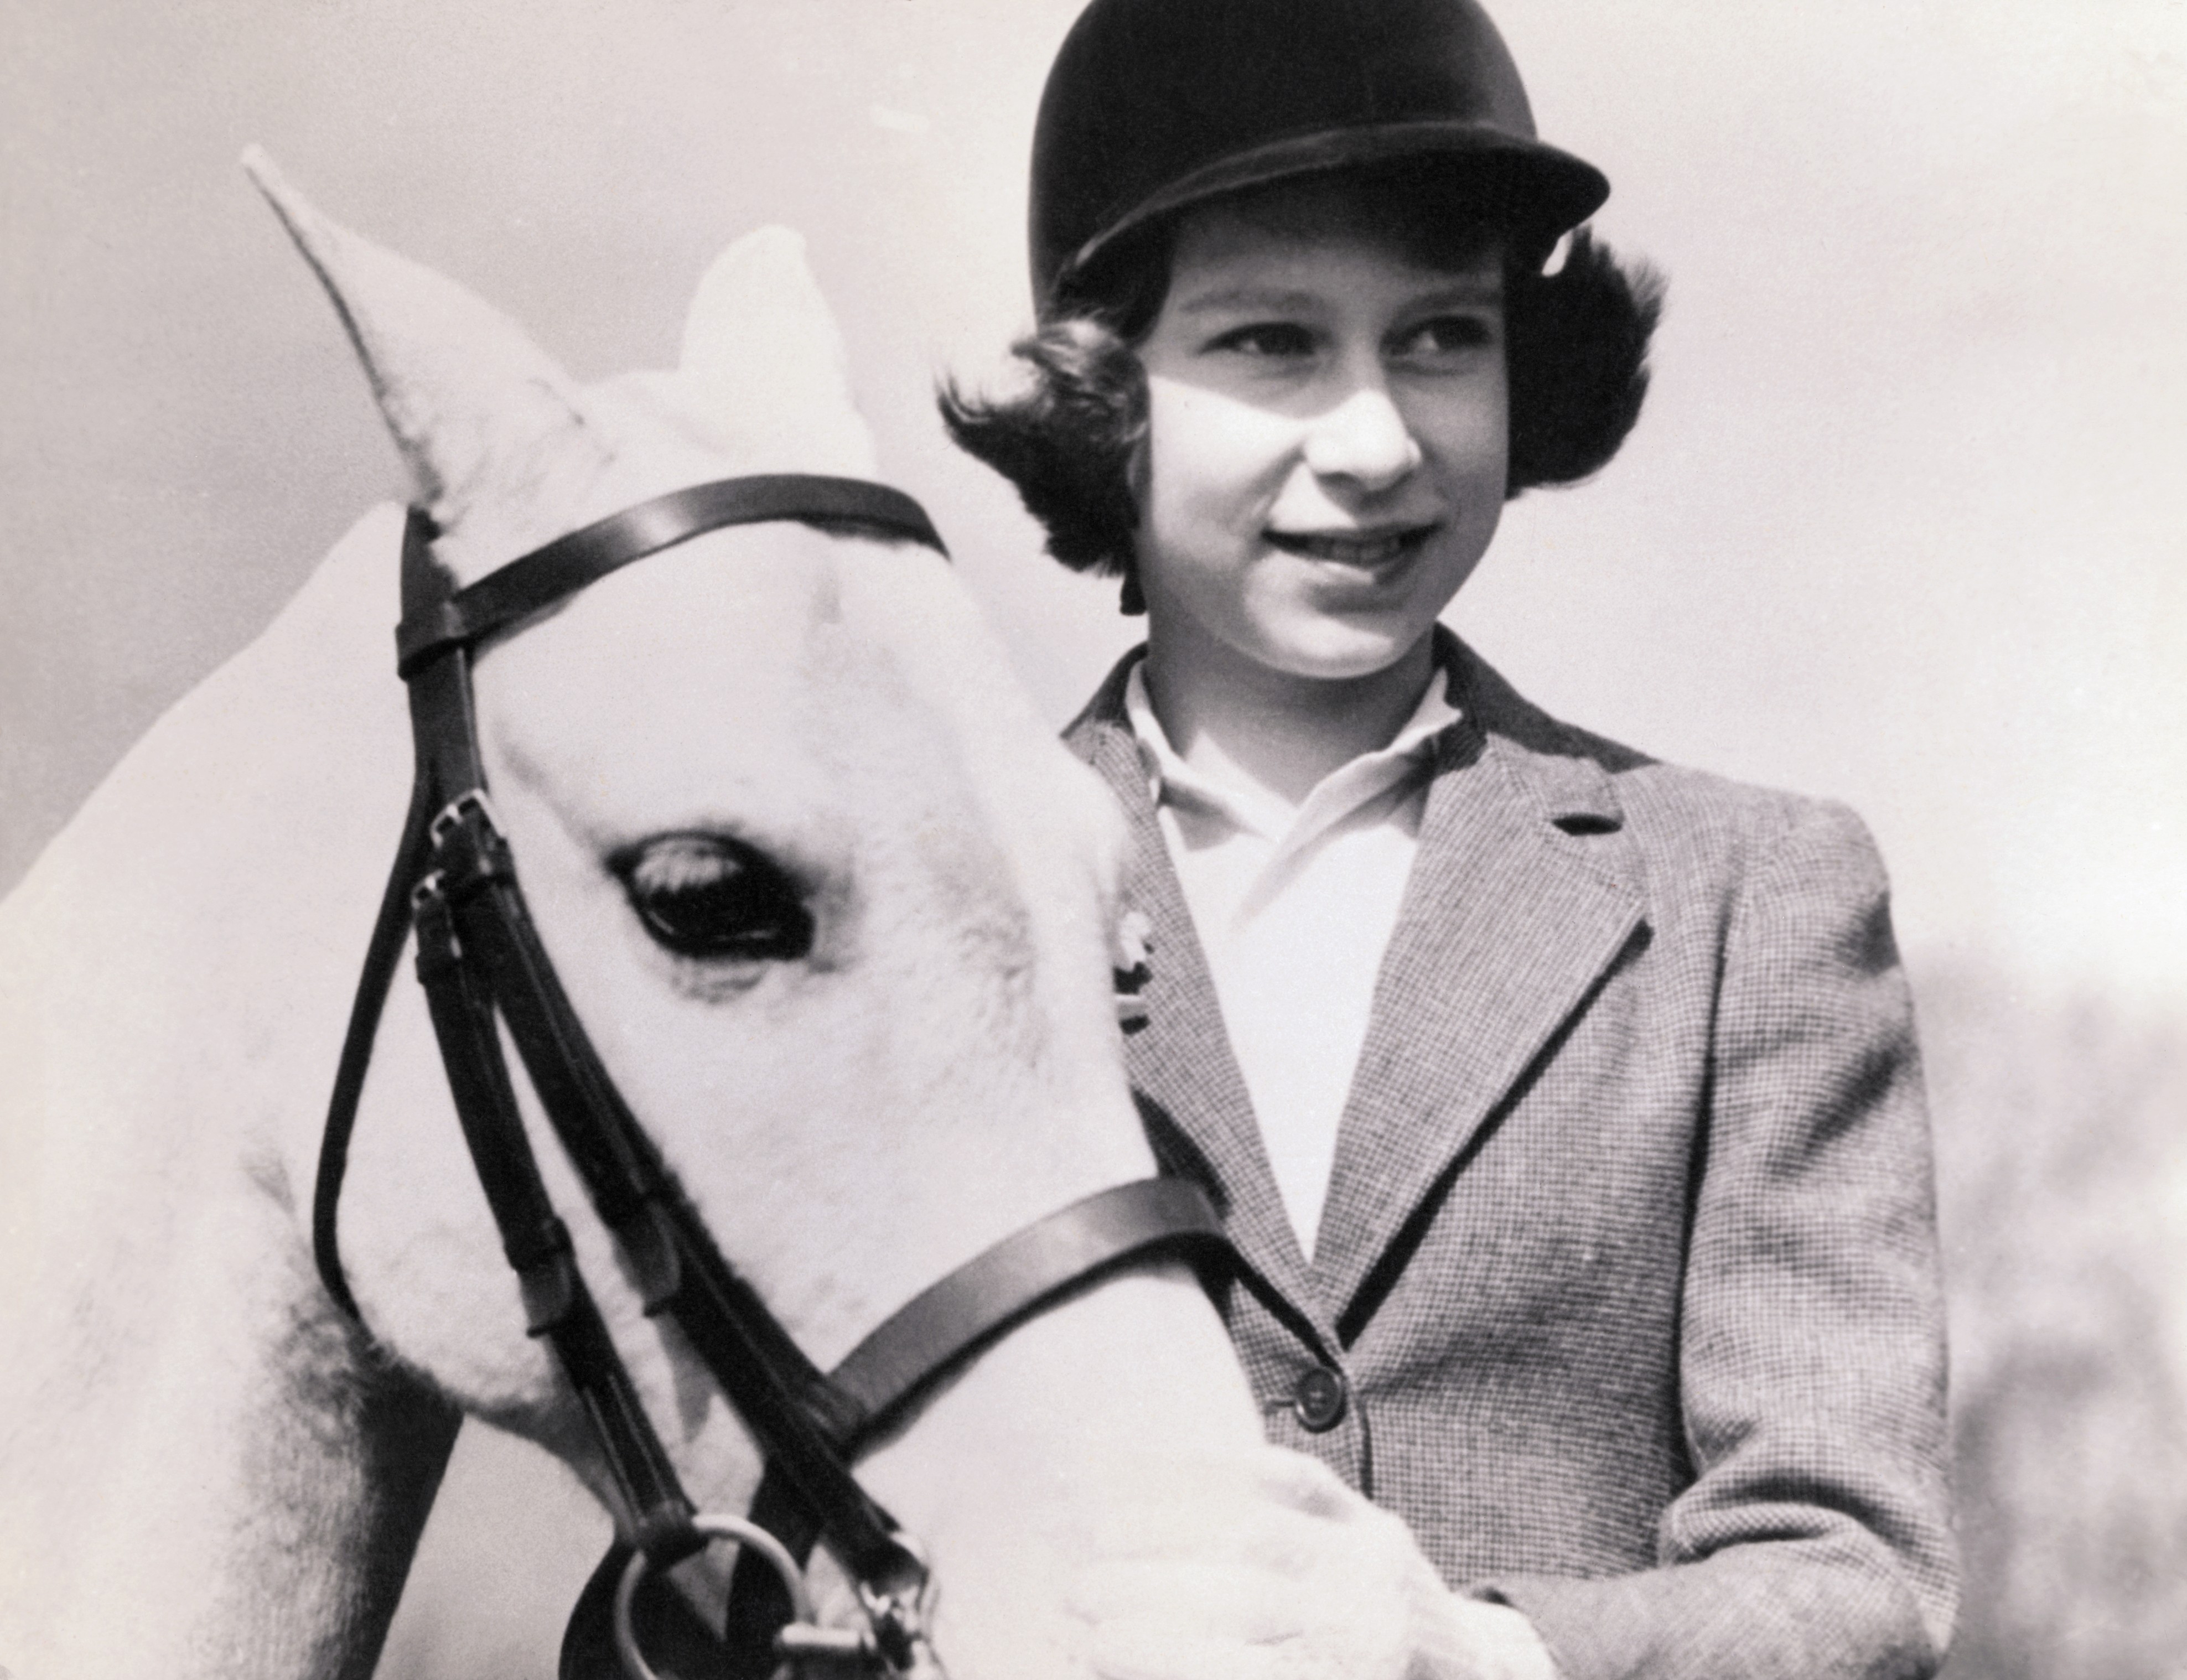 Crown Princess Elizabeth of Great Britain, later Queen Elizabeth II, with her pony, at age 10. (Foto: Bettmann Archive)